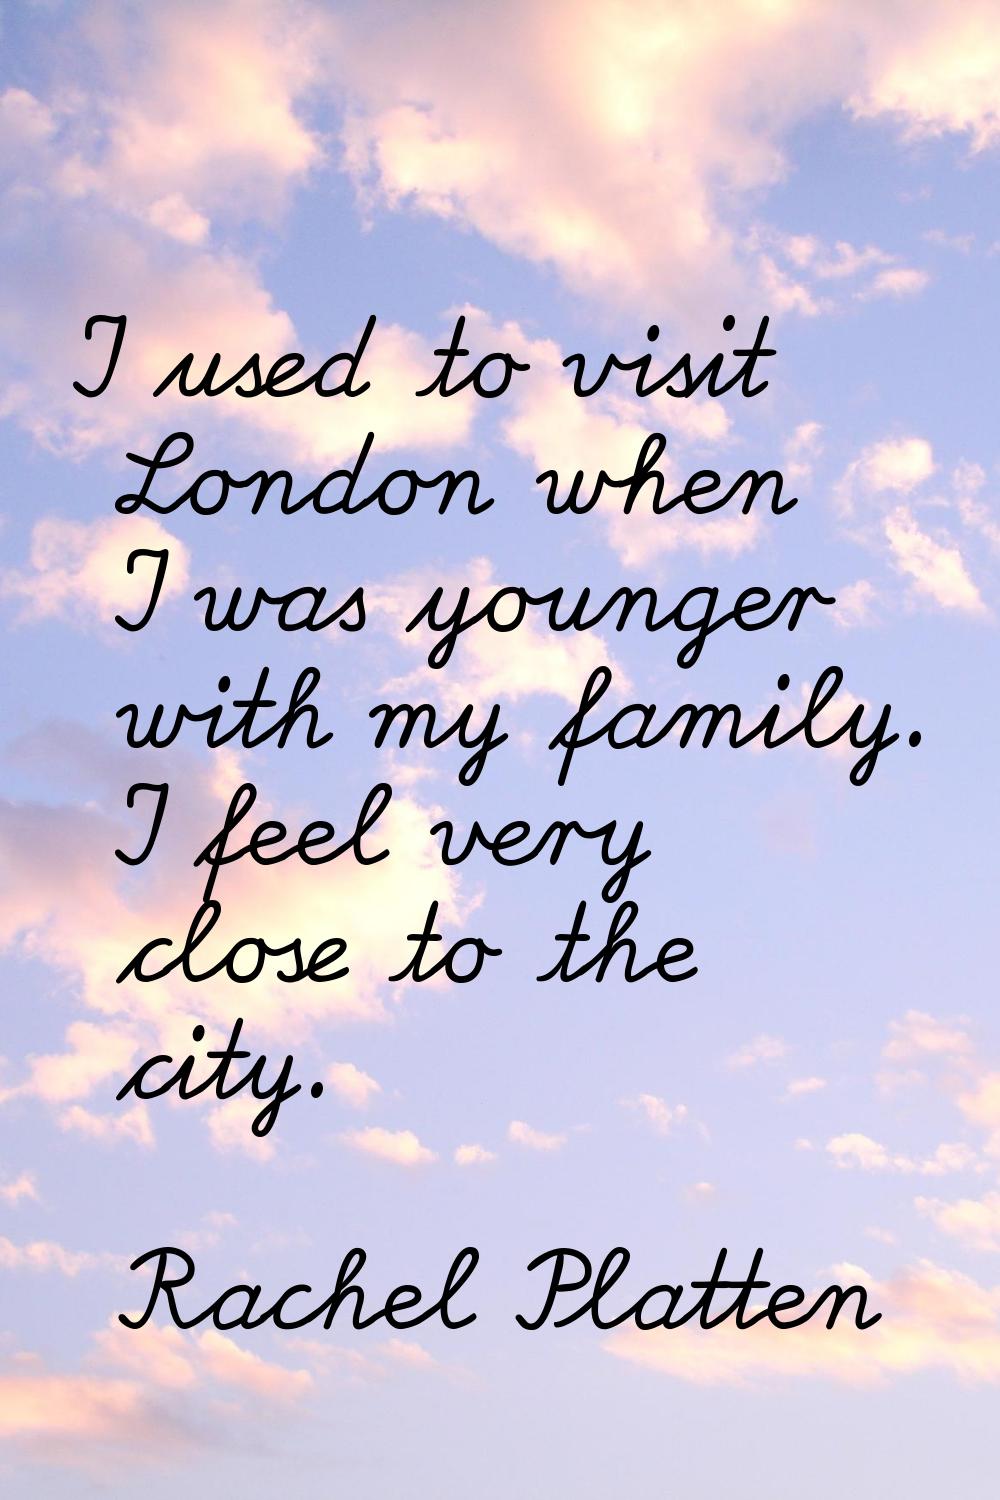 I used to visit London when I was younger with my family. I feel very close to the city.